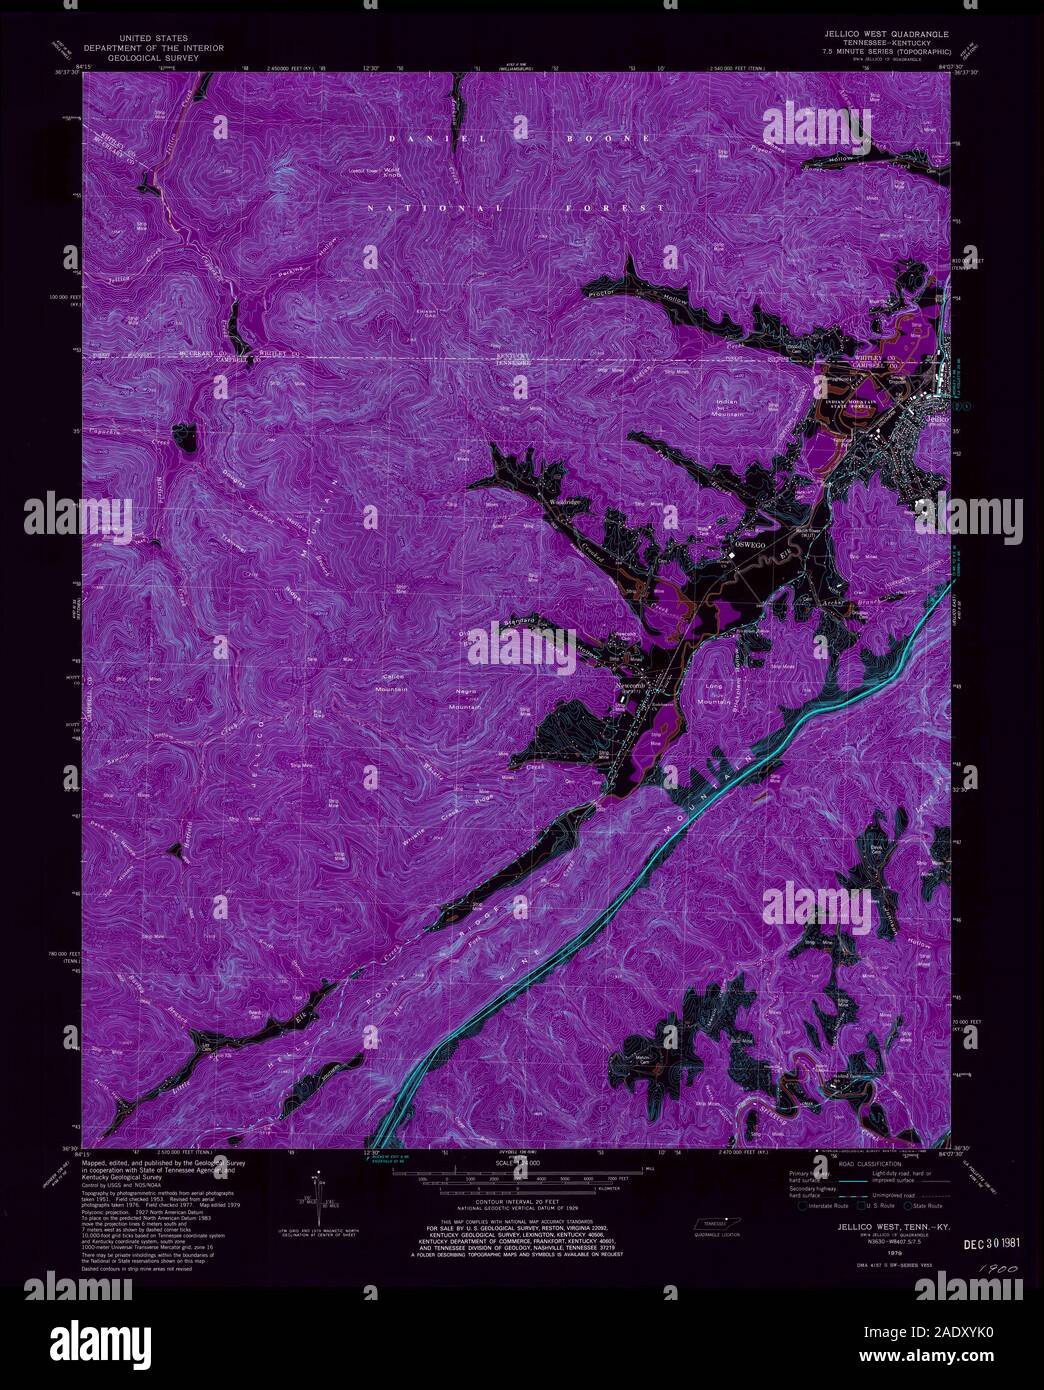 USGS TOPO Map Tennessee TN Jellico West 147852 1979 24000 Inverted Restoration Stock Photo